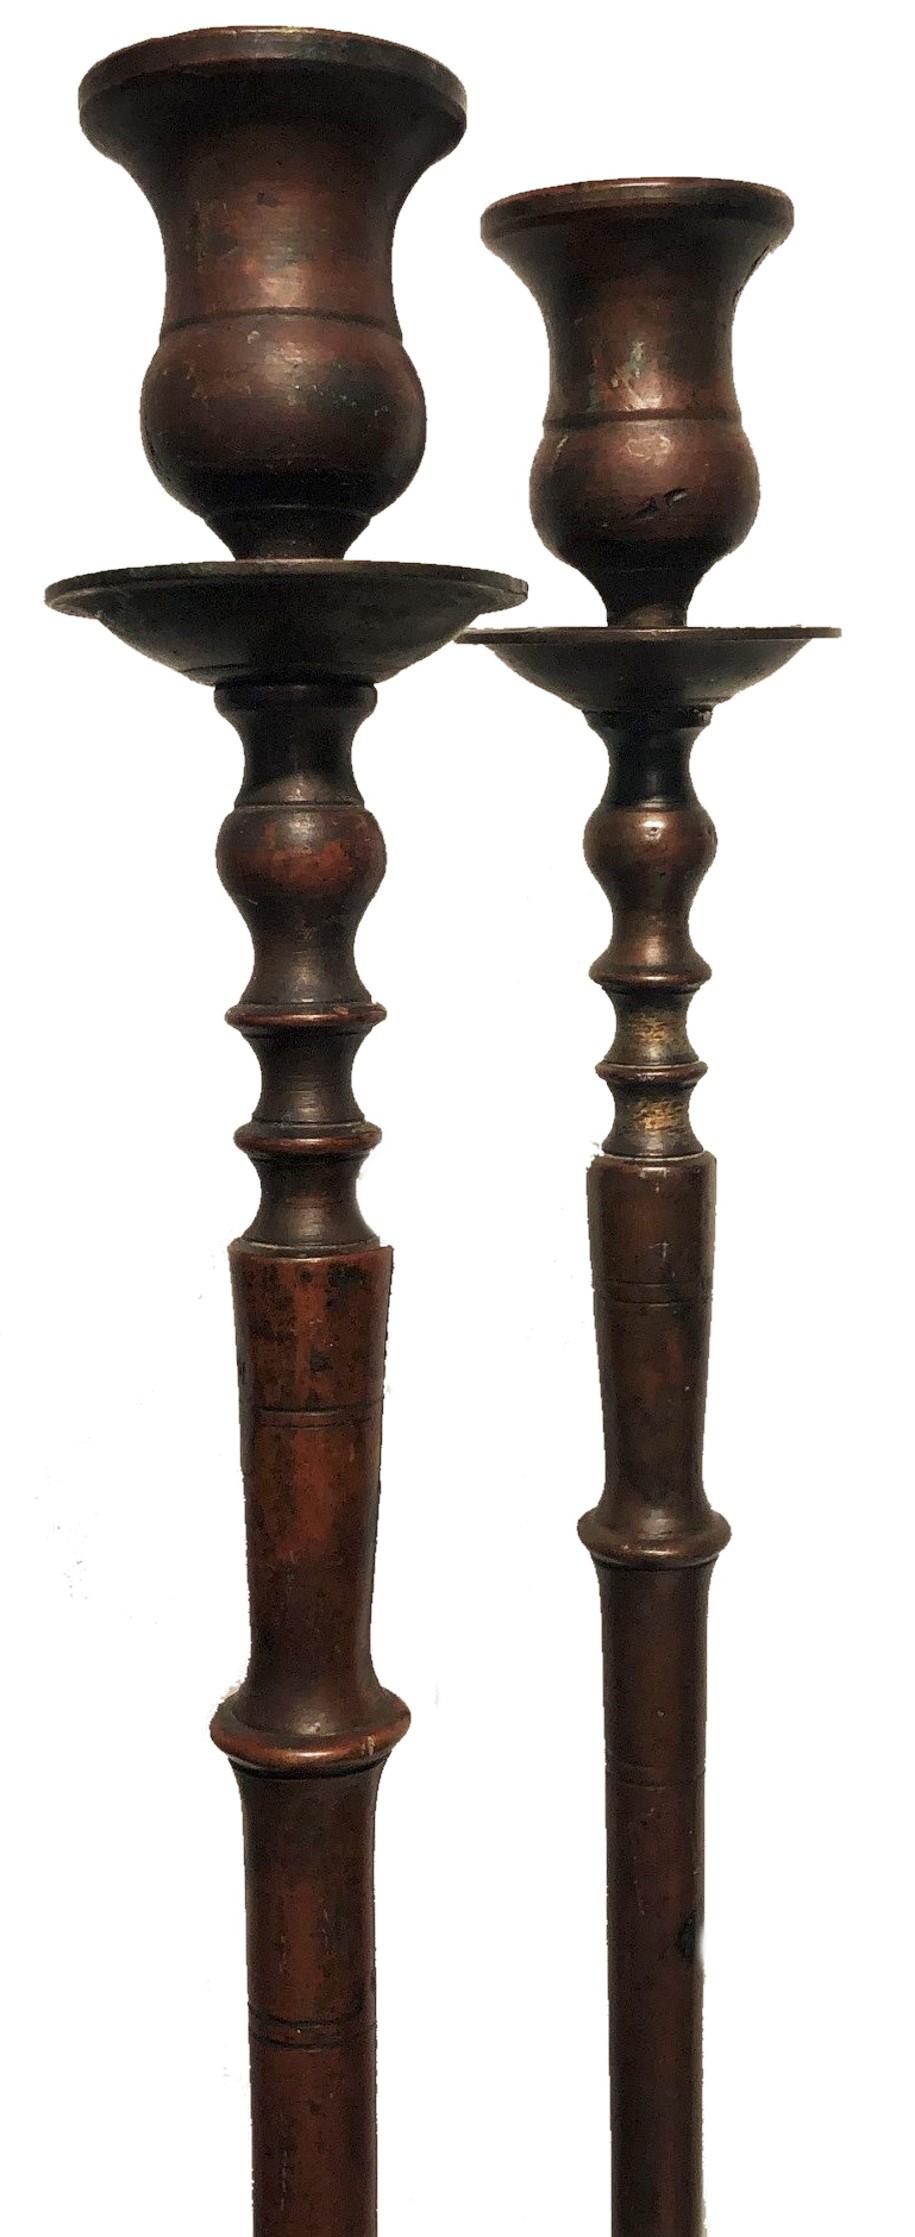 American Aesthetic Movement 
Pair of Bronze Candlesticks 
in Manner of Tiffany
ca. 1880s

DIMENSIONS
Height: 18.25 inches
Width: 3.25 inches
Depth: 3.25 inches

ABOUT
This elegant pair of tall, graceful, perfectly shaped bronze candle holders are